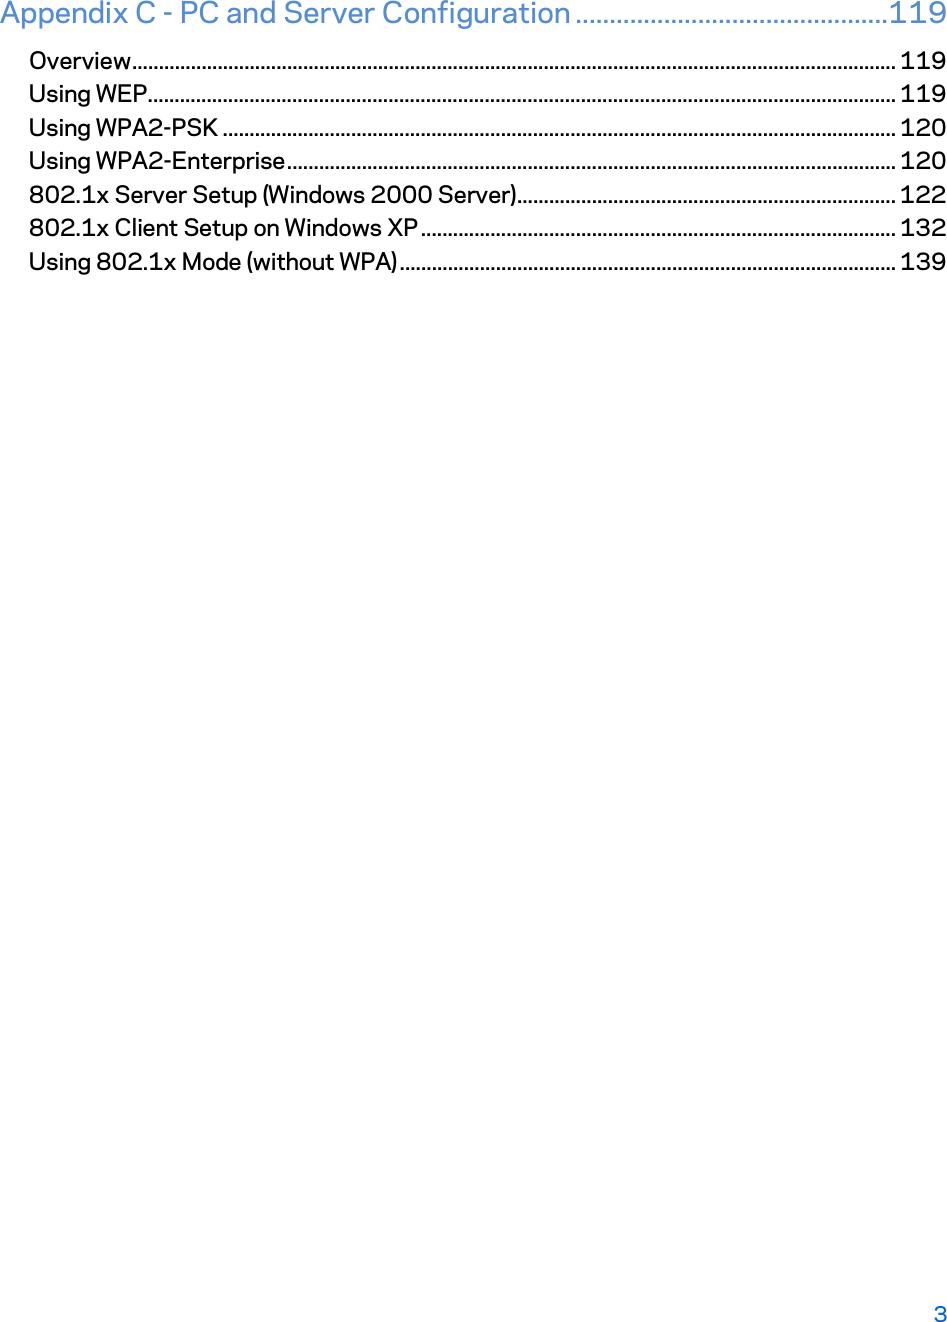 Appendix C - PC and Server Configuration ..............................................119 Overview ............................................................................................................................................... 119 Using WEP ............................................................................................................................................ 119 Using WPA2-PSK .............................................................................................................................. 120 Using WPA2-Enterprise .................................................................................................................. 120 802.1x Server Setup (Windows 2000 Server) ....................................................................... 122 802.1x Client Setup on Windows XP ......................................................................................... 132 Using 802.1x Mode (without WPA) ............................................................................................. 139    3 